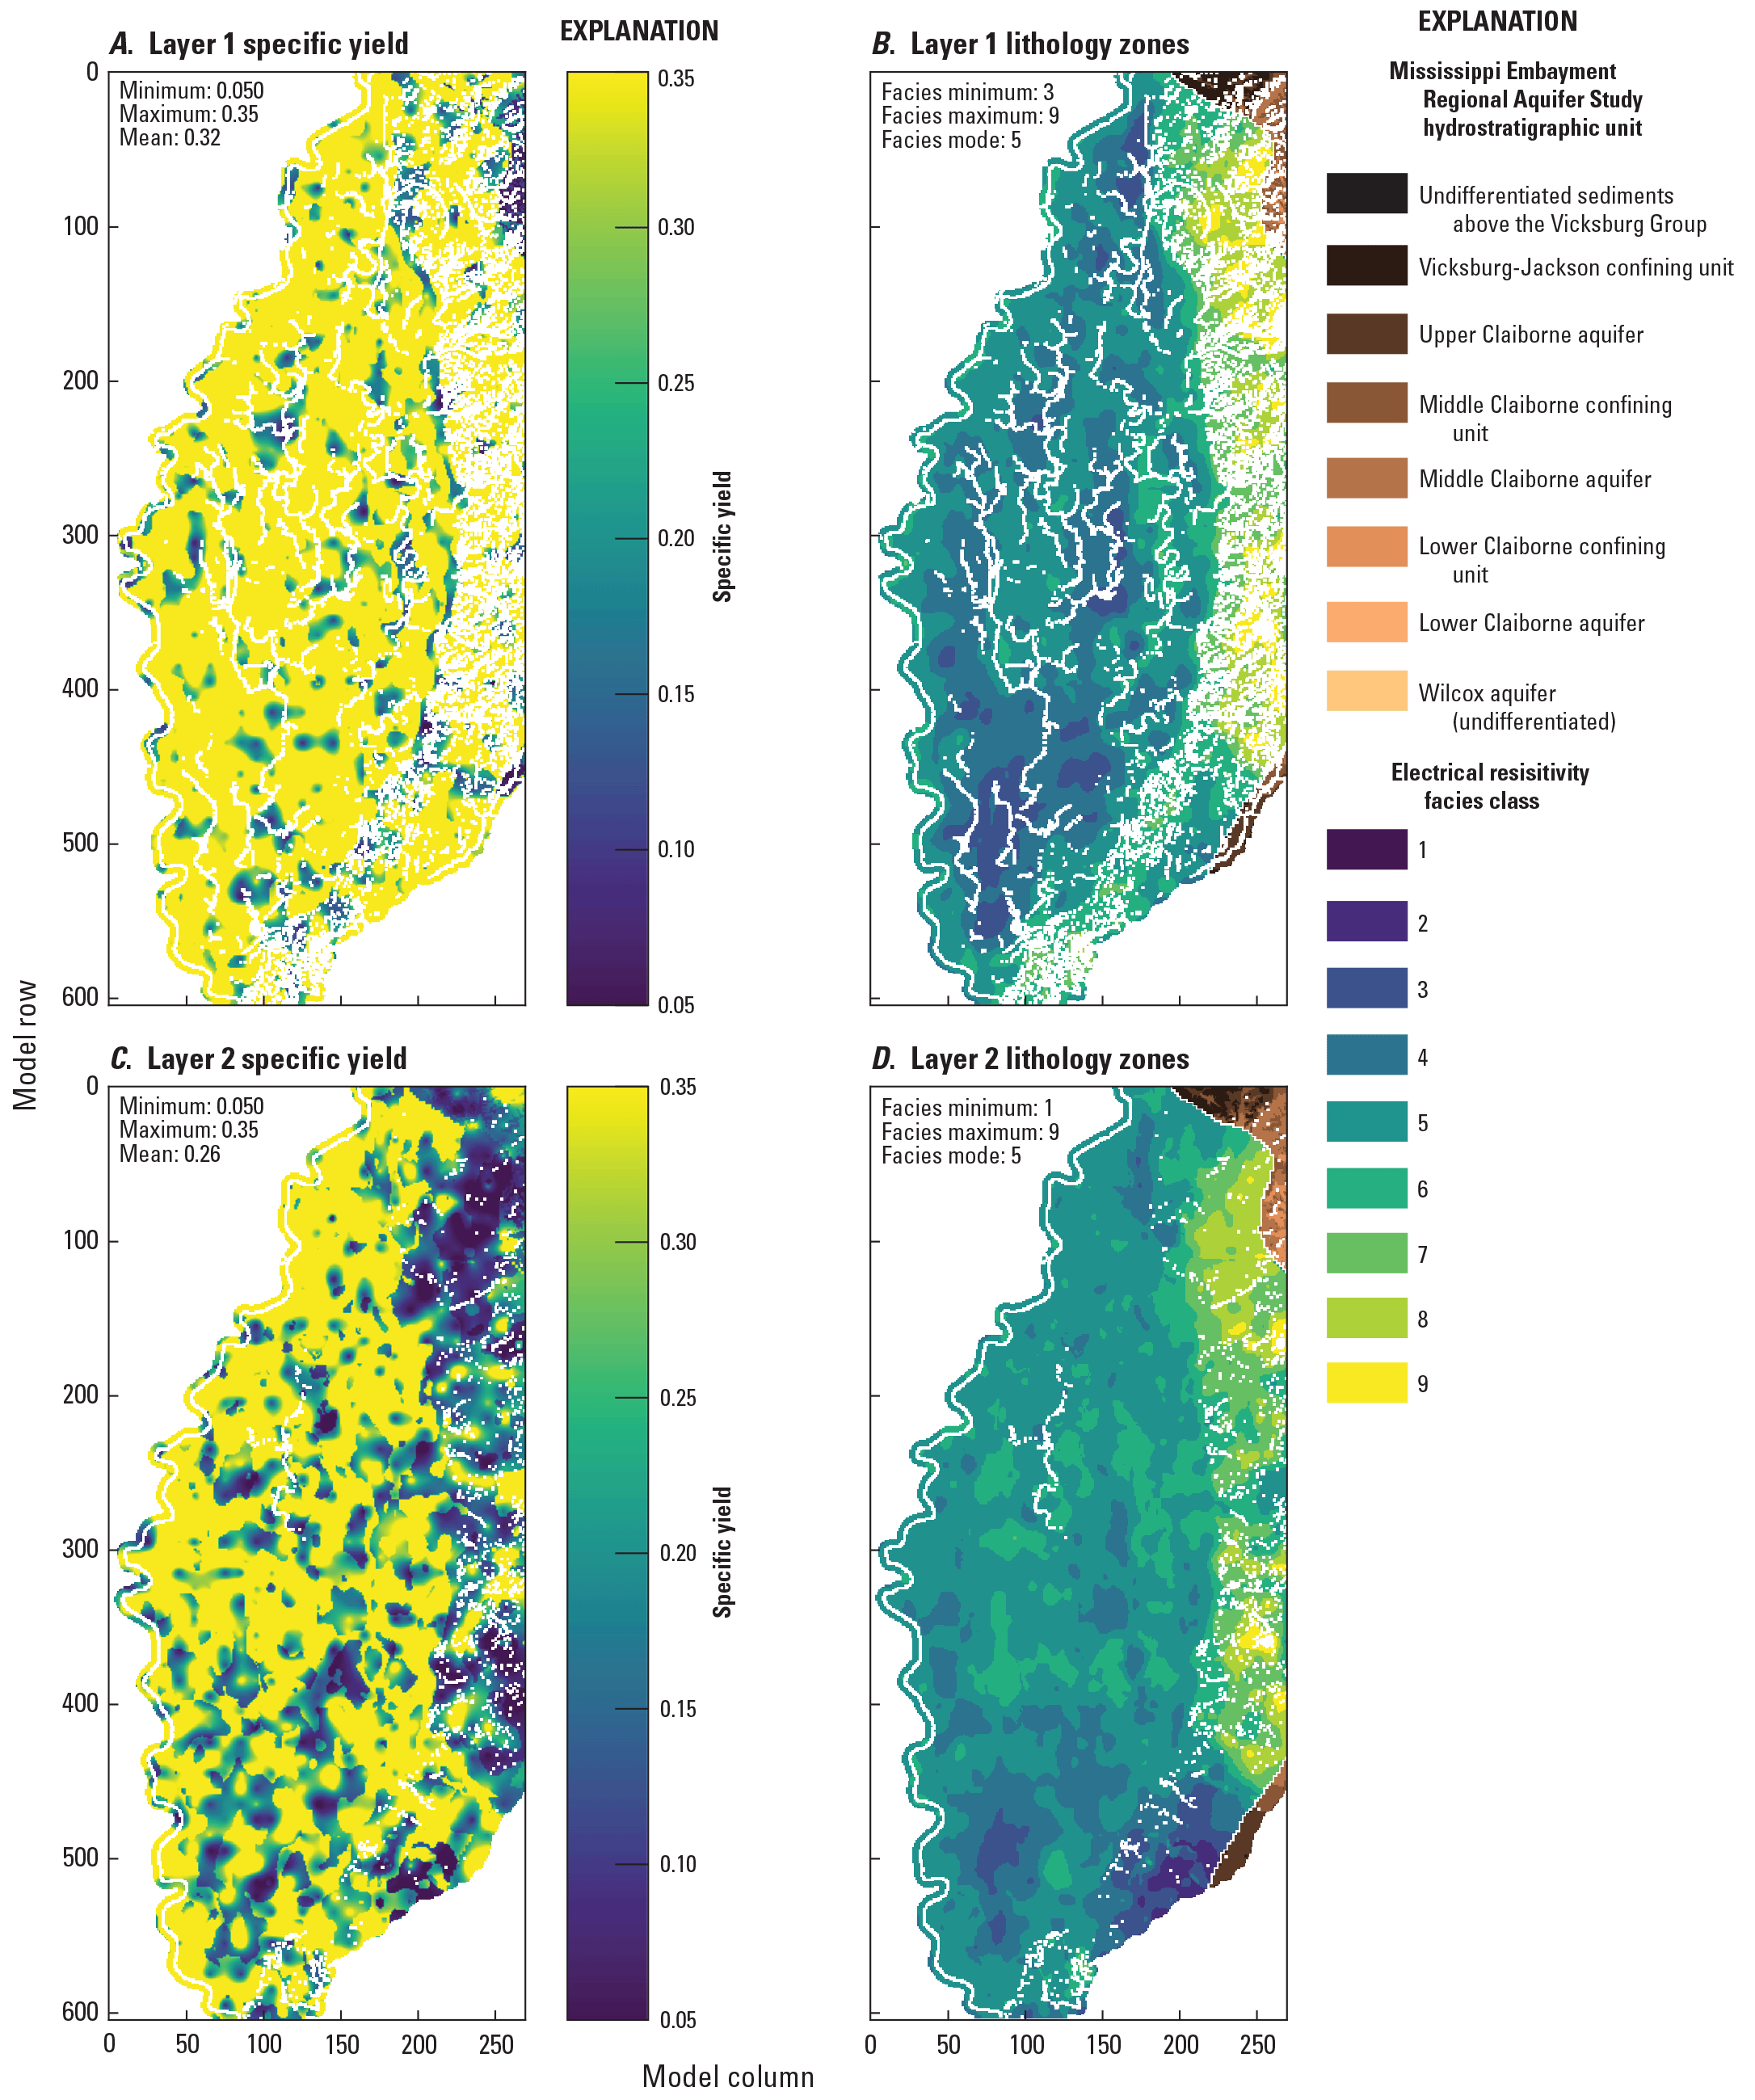 Values in the alluvial aquifer range from 0.05 to 0.35, with mean values in individual
                     layers ranging from about 0.23 to 0.32. Values in the upper part of the Tertiary units
                     covered by the AEM survey range from 0.05 to 0.35, with layer means ranging from about
                     0.12 to 0.26.